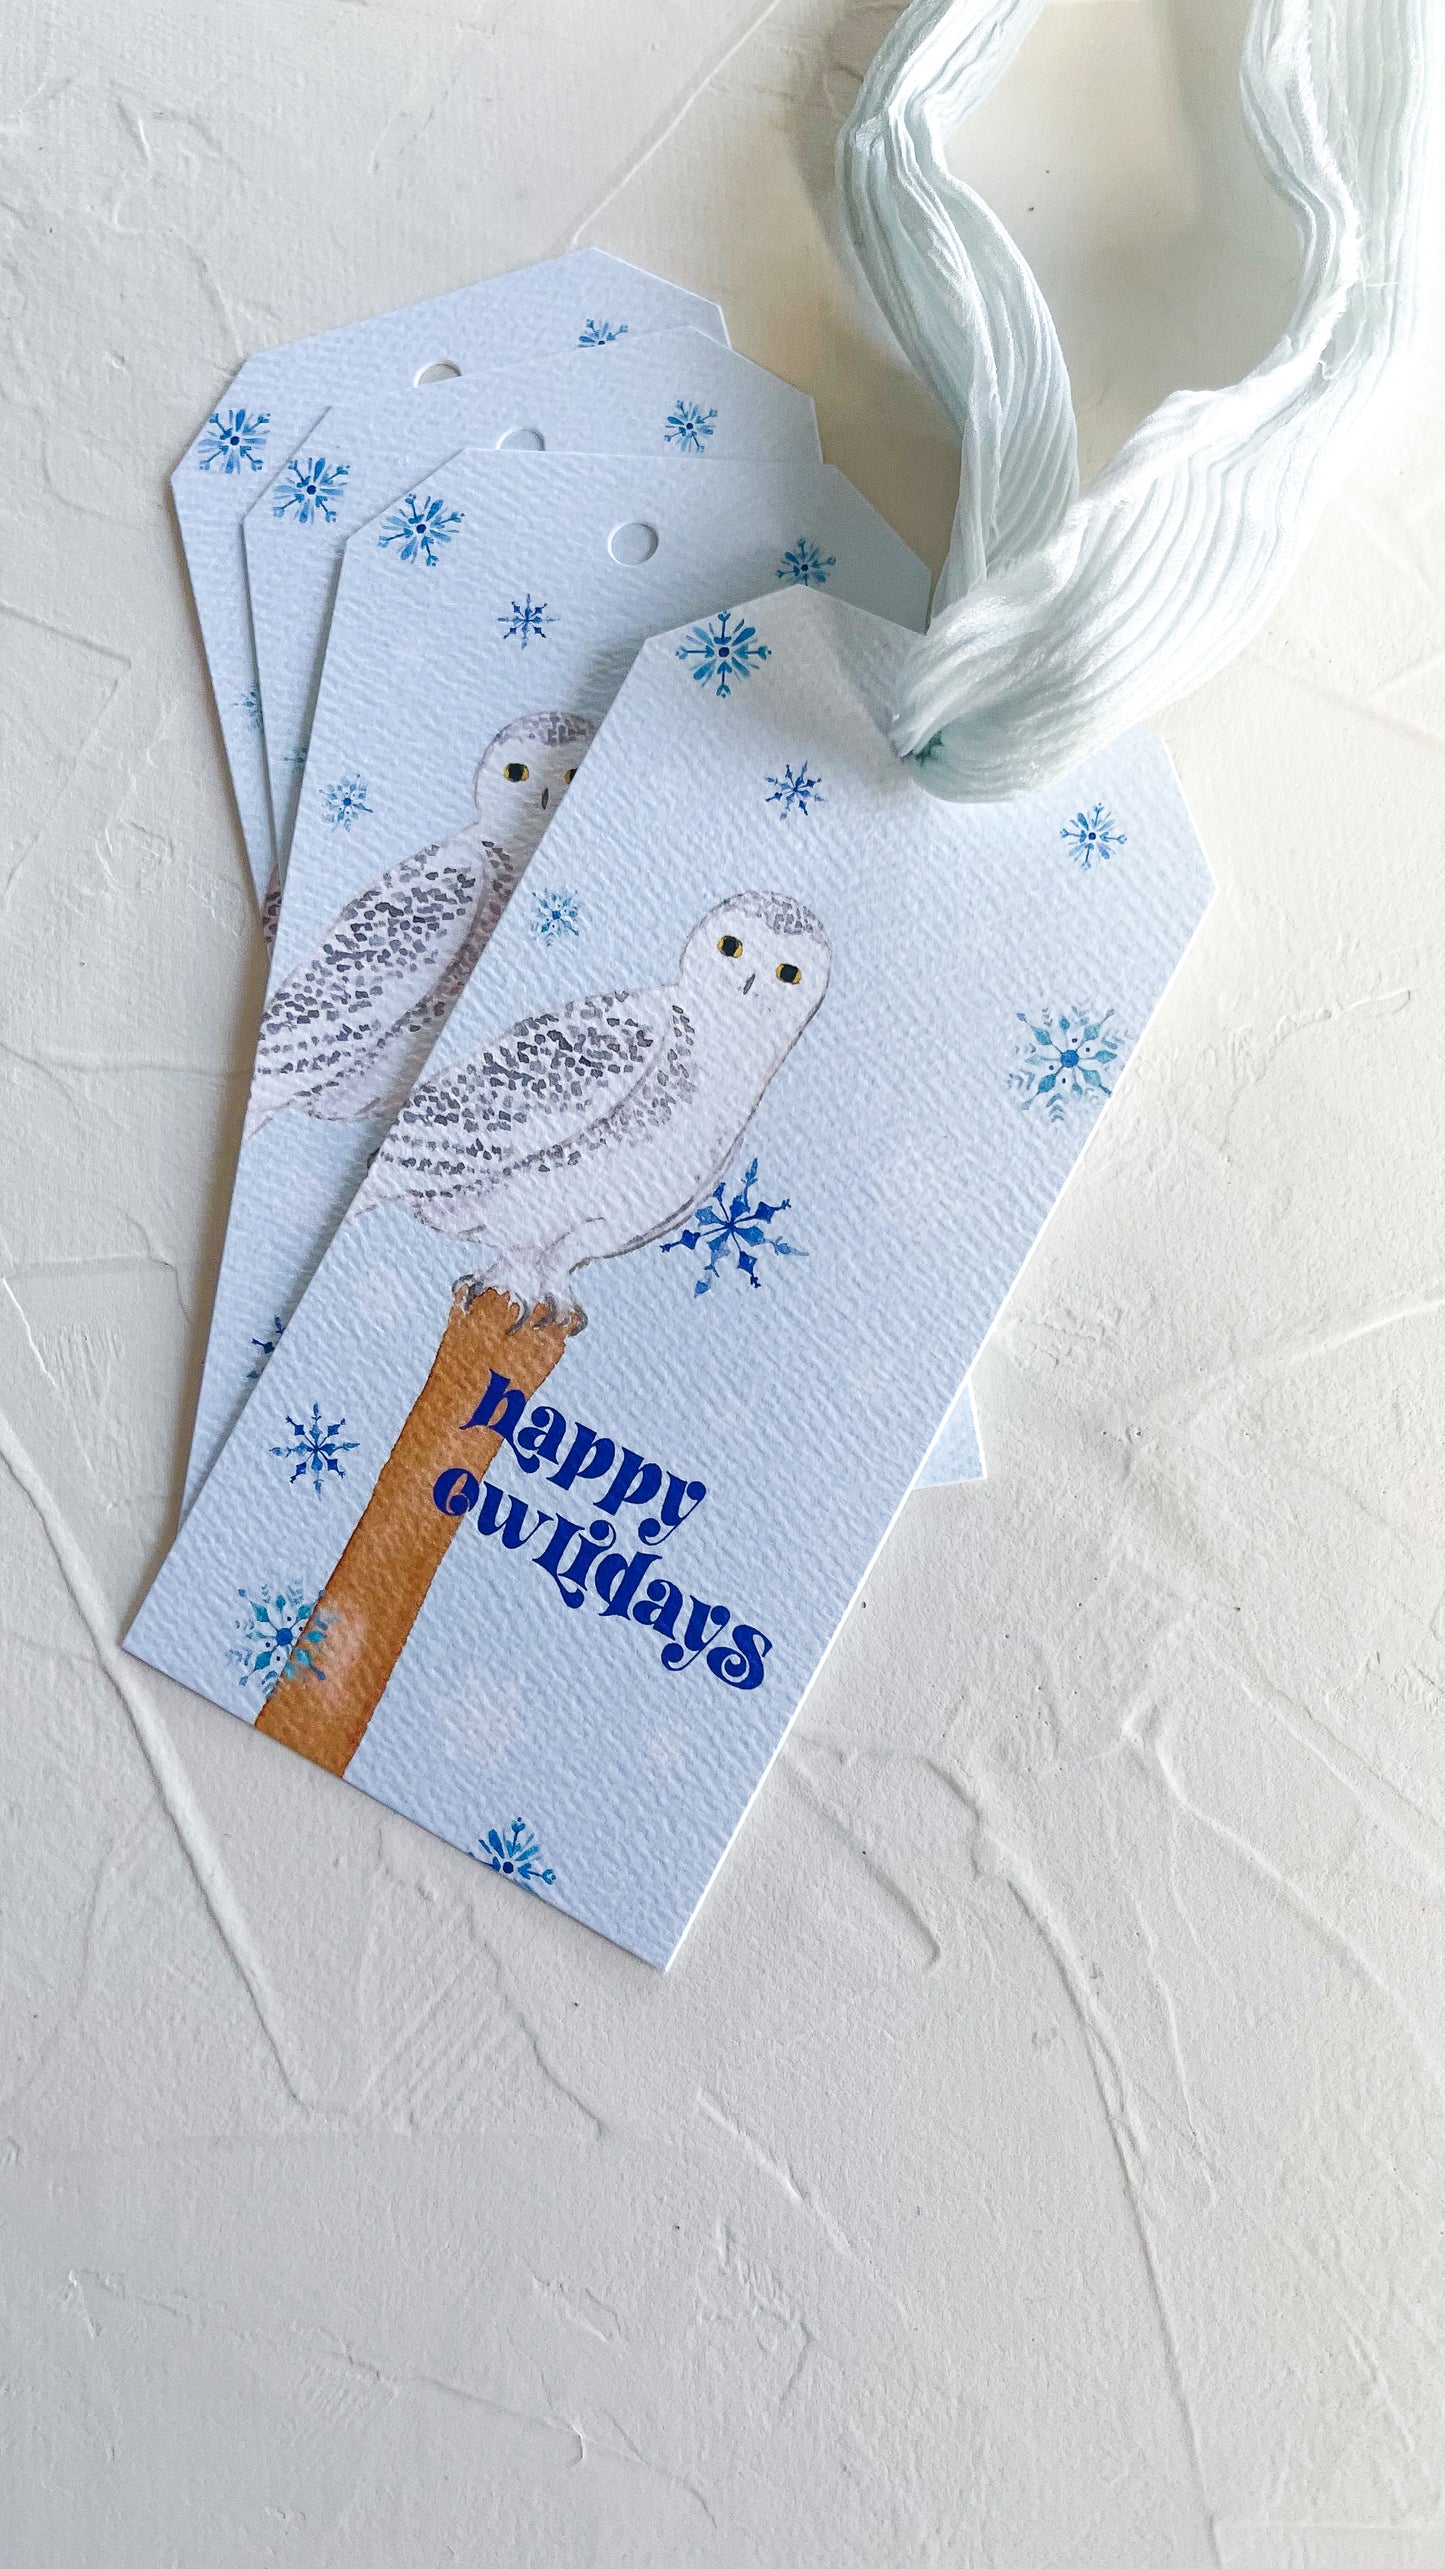 DISCONTINUED Happy Owlidays Luxurious Watercolor Gift Tags- Set of 5